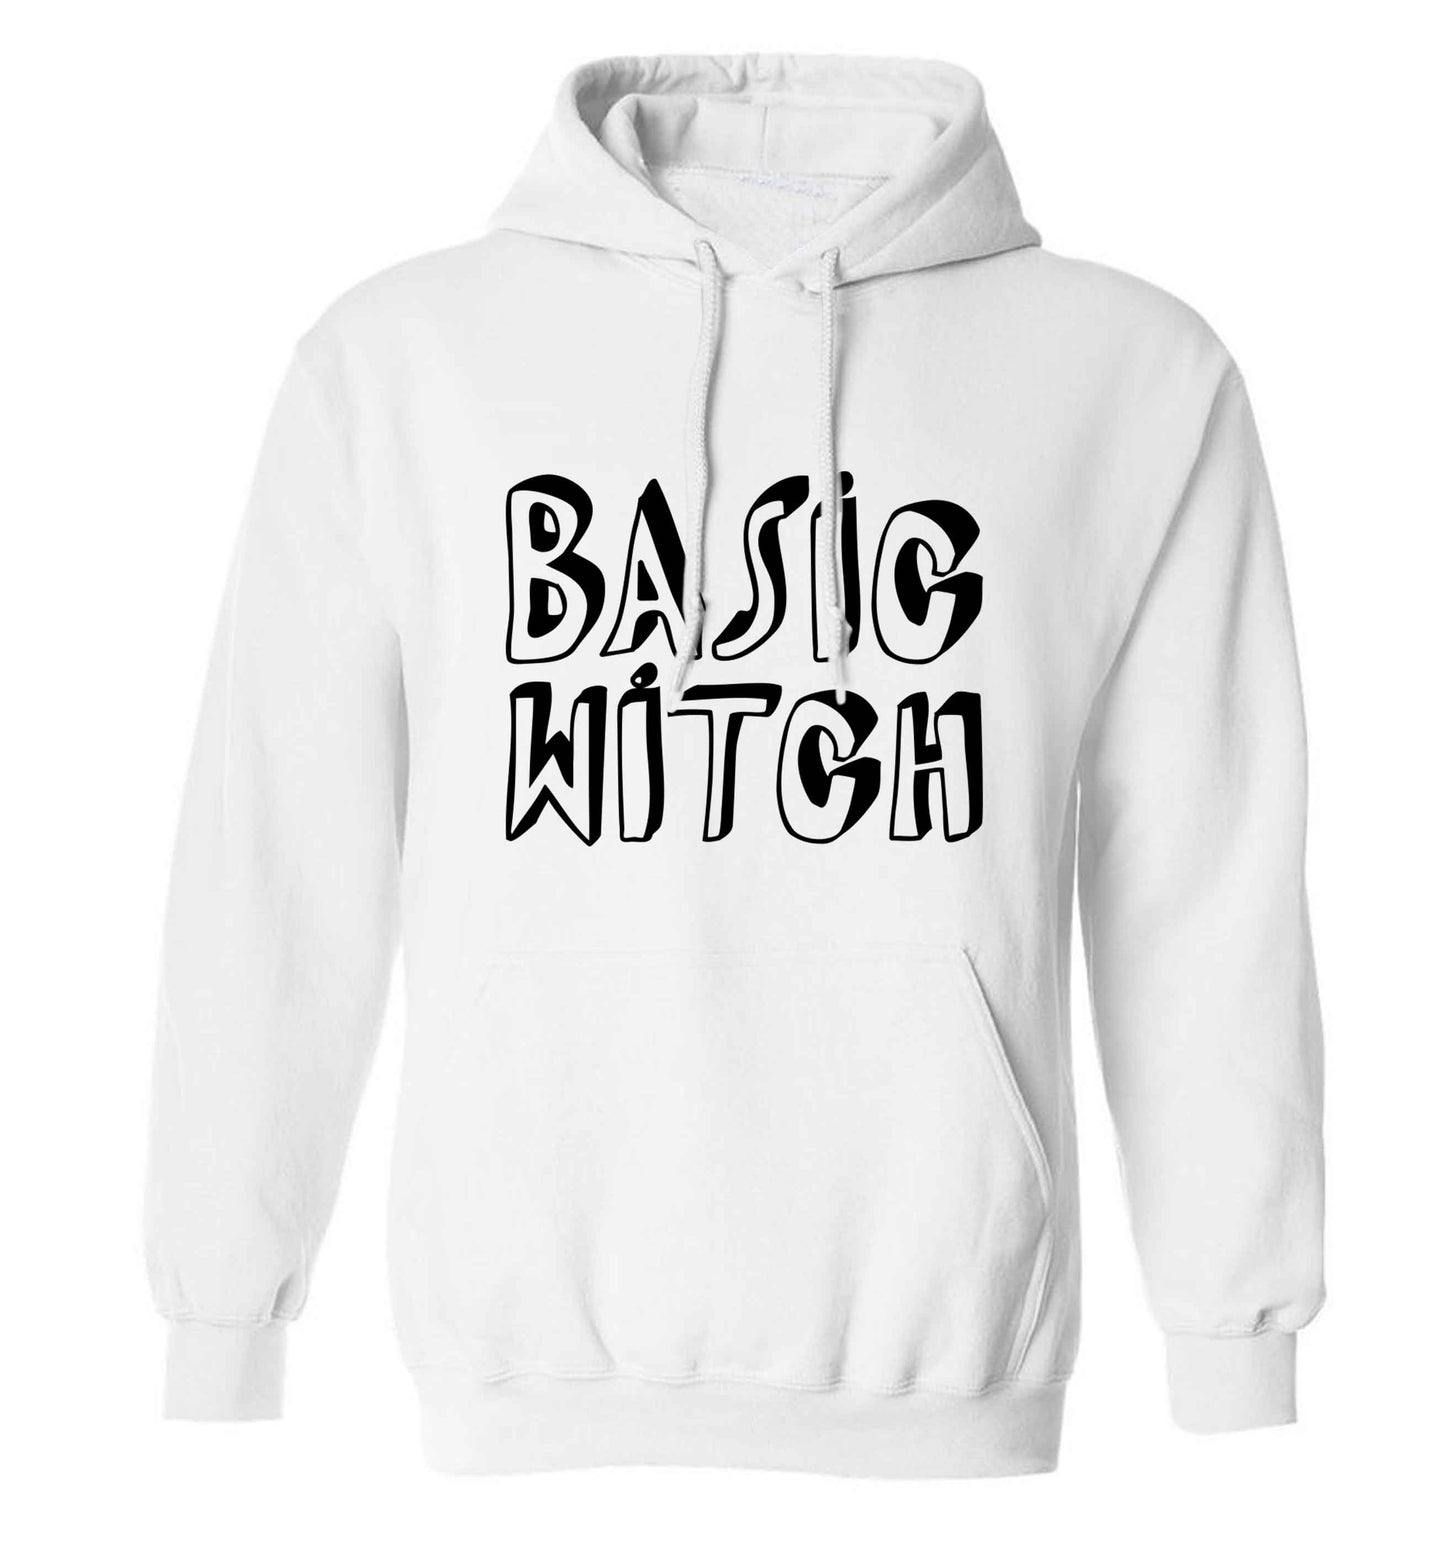 Basic witch adults unisex white hoodie 2XL